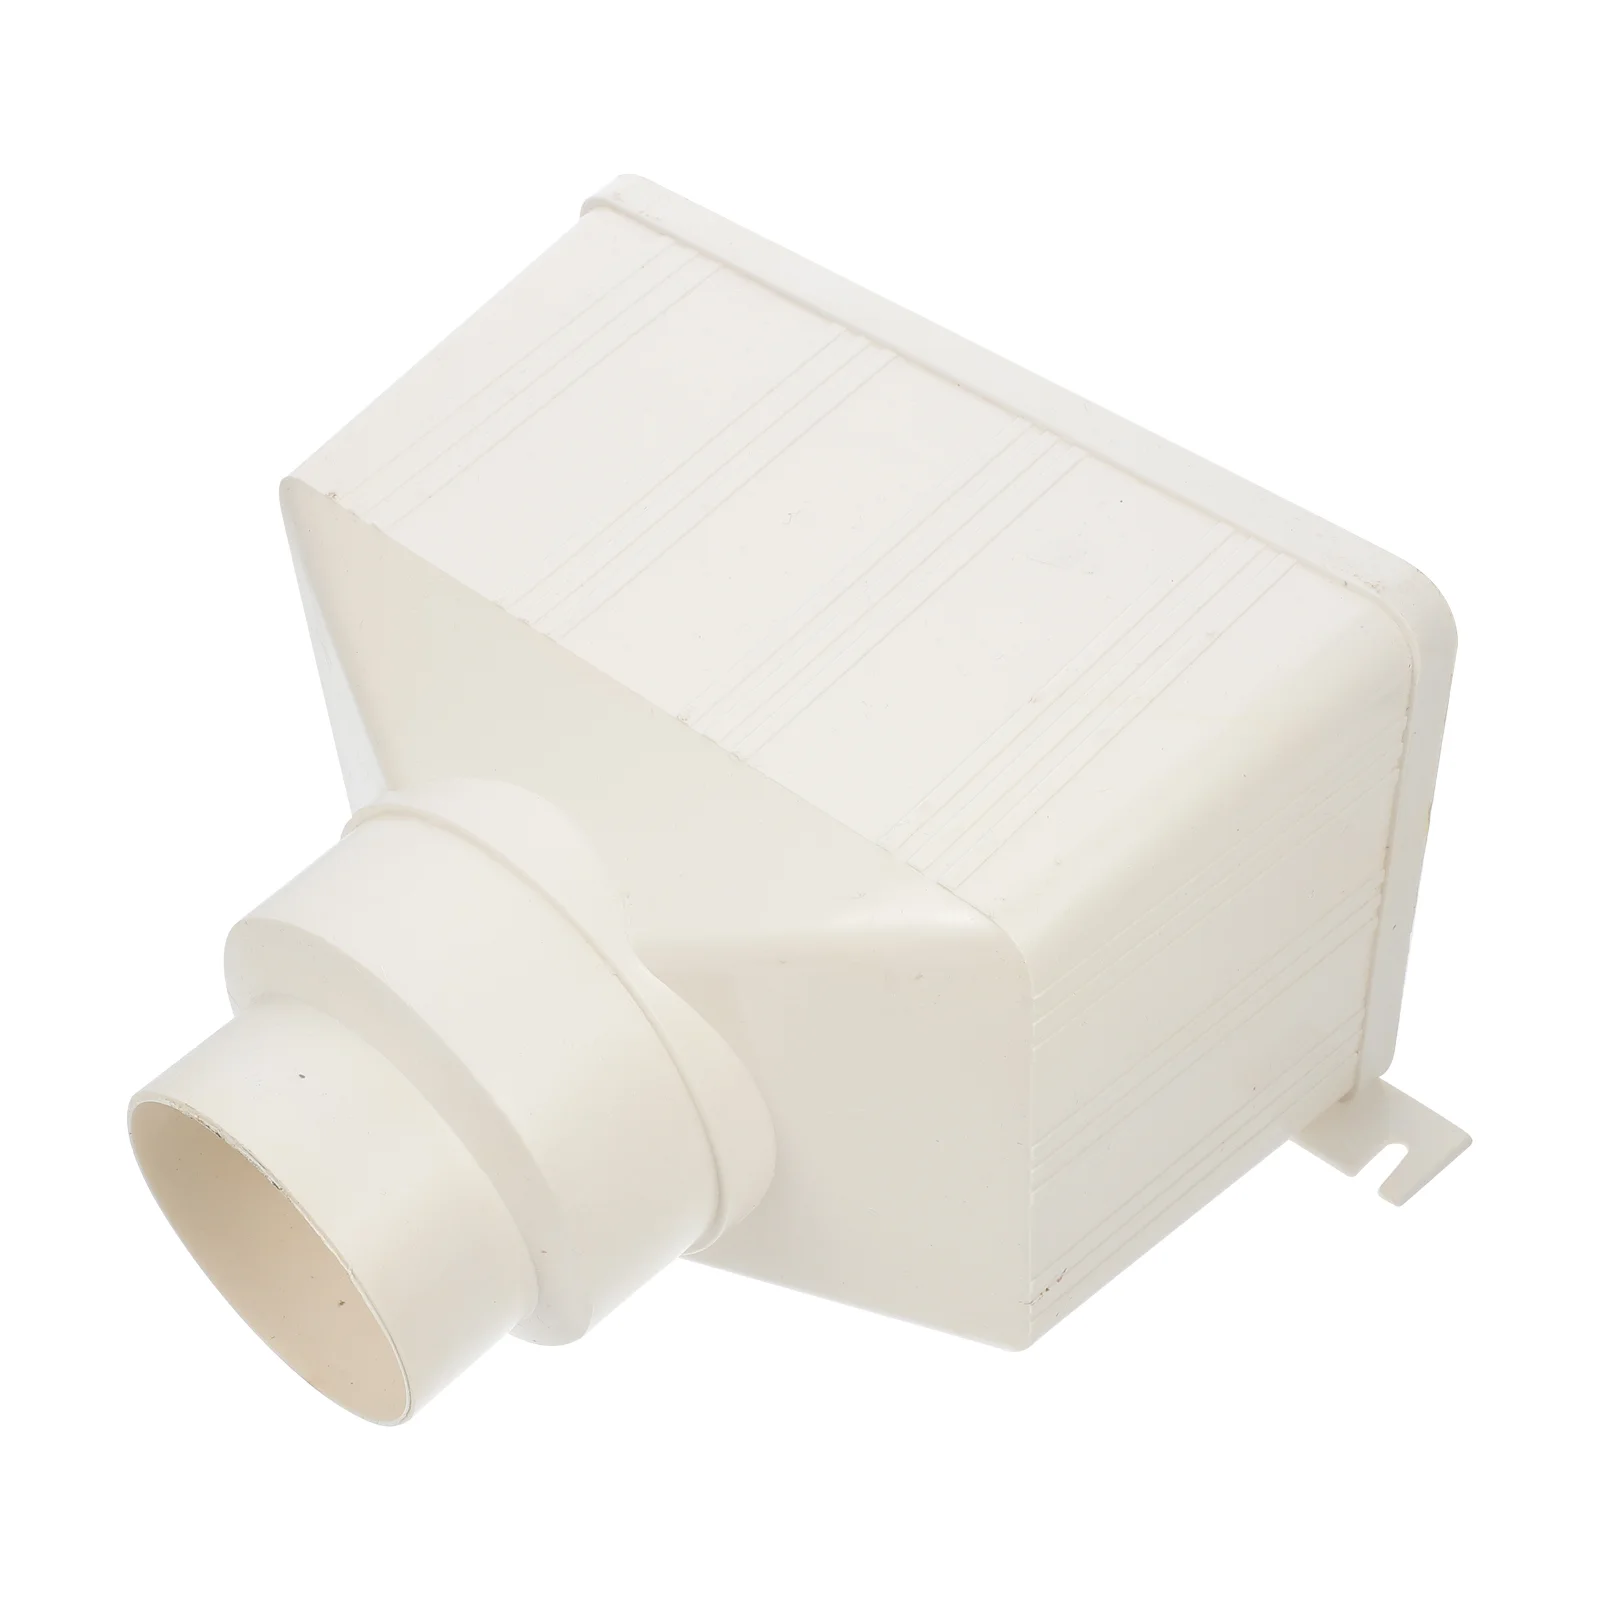 

Adaptador Universal Collecting Bucket Outdoor Downpipe Gutter Downspout Connector 26.5X21CM Rainwater Drainage White Pvc